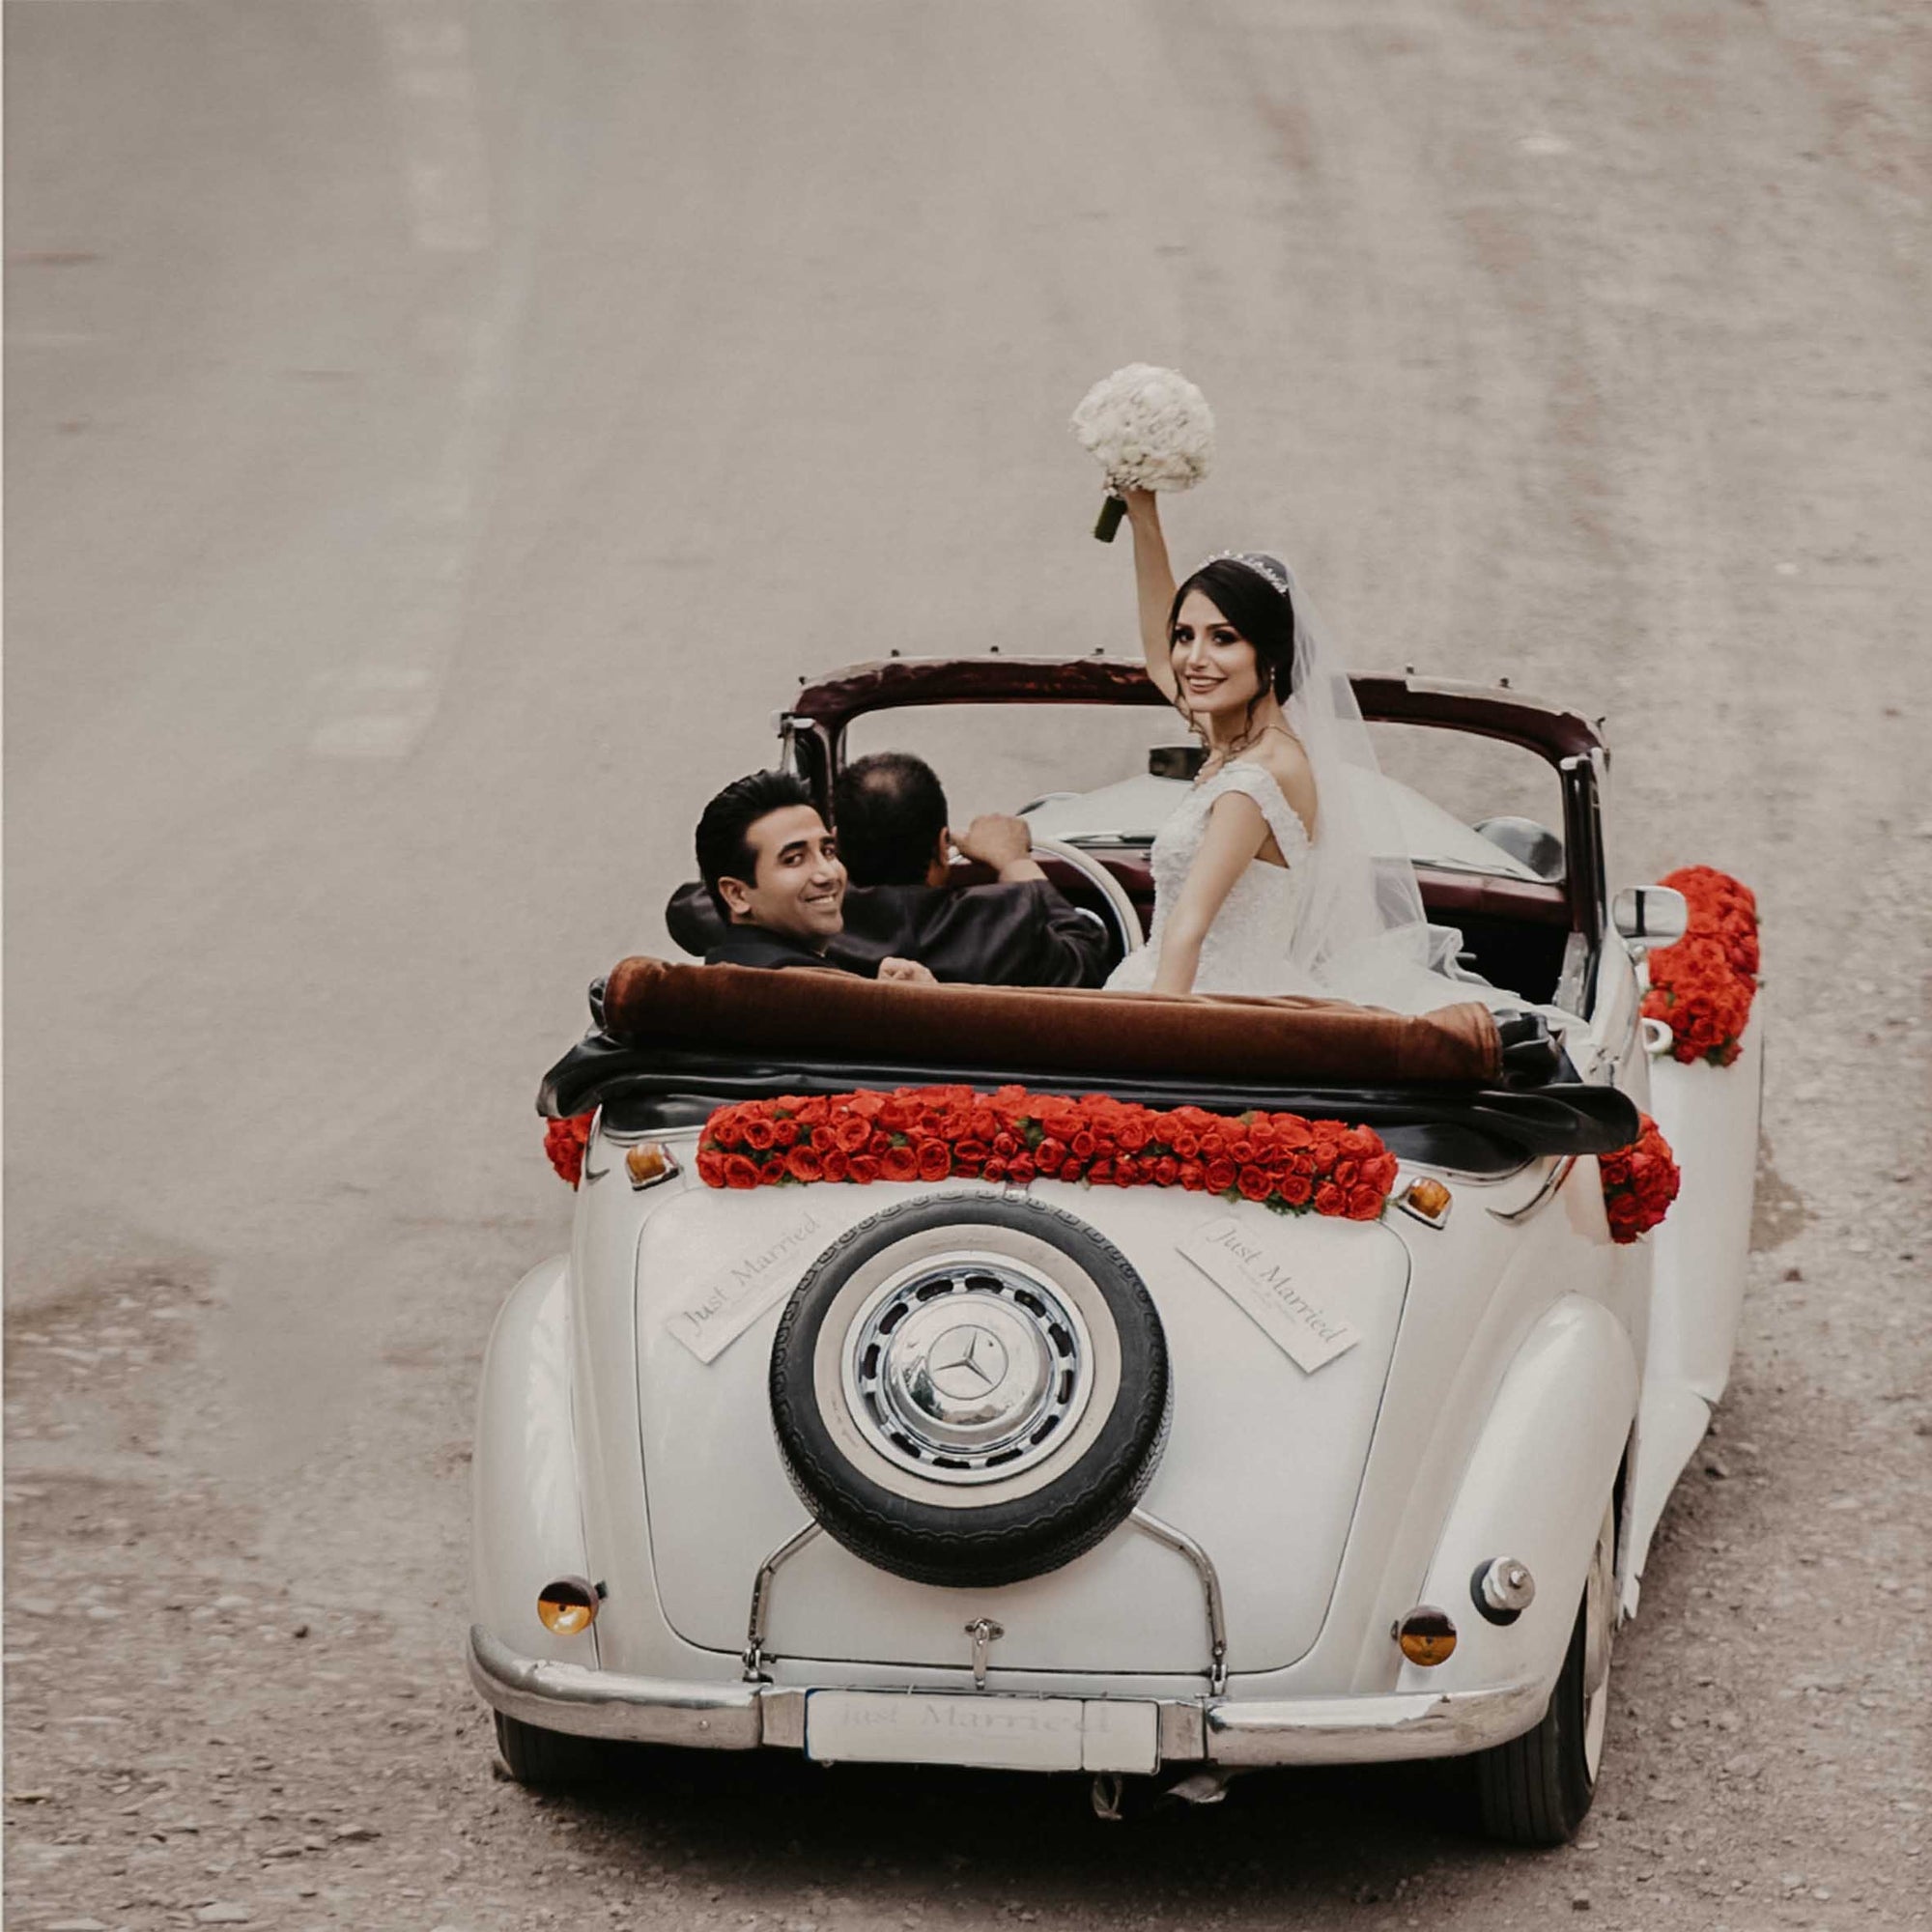 Ride Like a King and Queen: Arranging Transportation for Your Royal Wedding